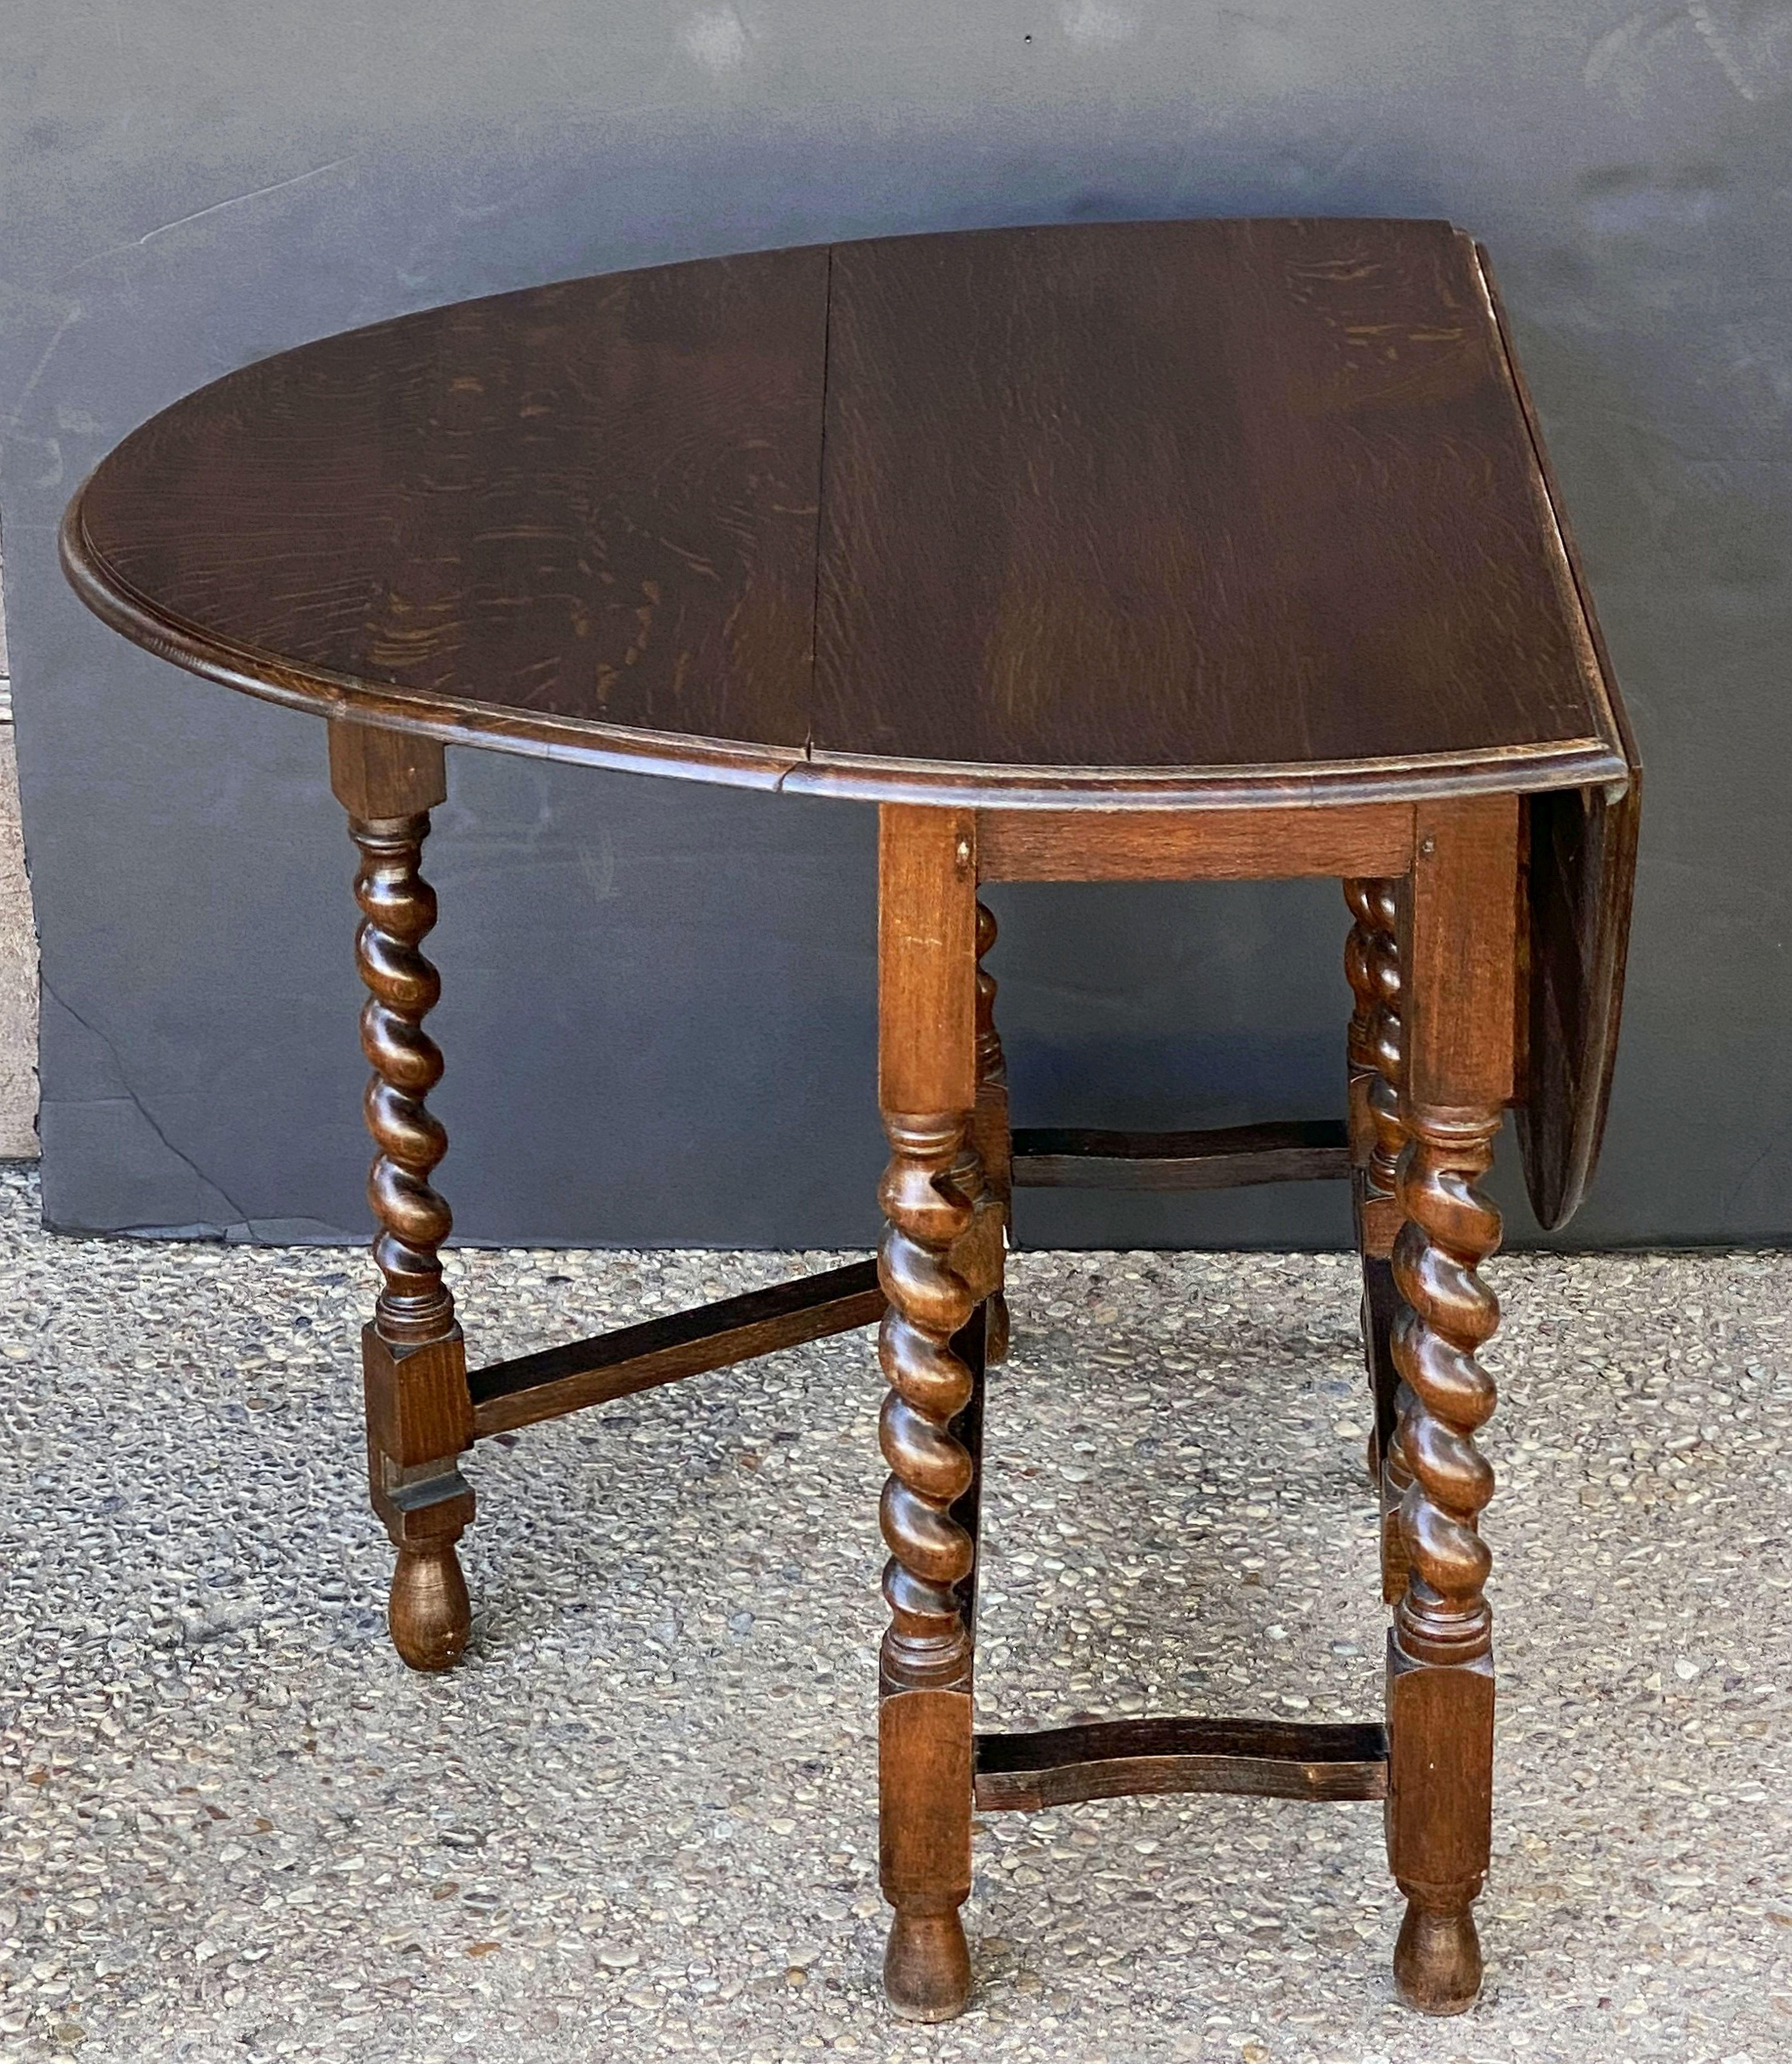 A Classic English drop-leaf gate-leg table of oak, featuring a moulded top with drop-down sides, over a stretcher of six barley-twist supports.
Opens to an oval top.

Measures: 

Height 28 inches
Width 34 3/4 inches
Depth (Closed) 16 1/4